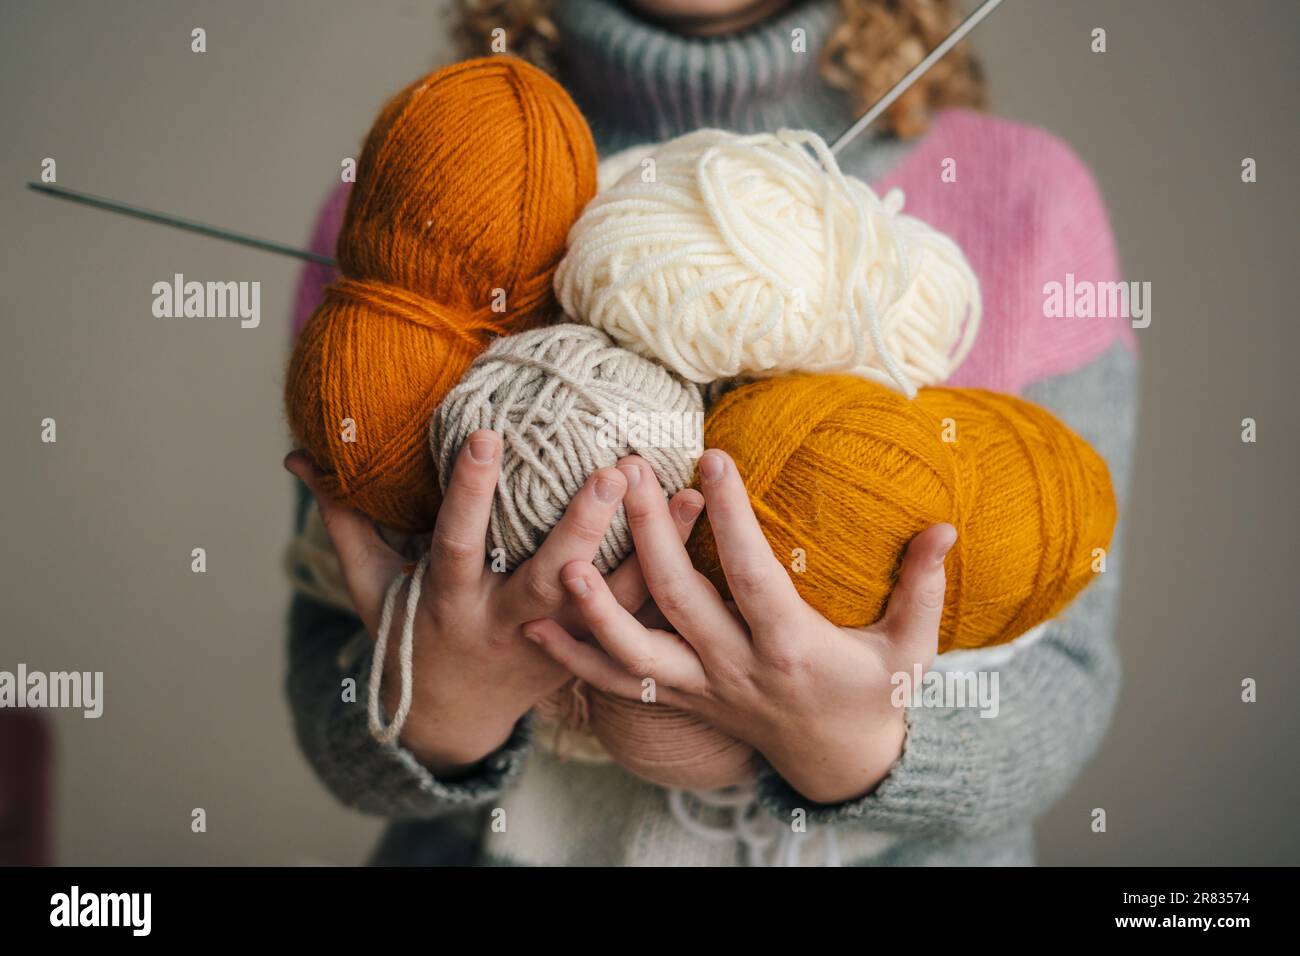 Woman's Hand Holds Large Knitting Needles Knitted Yarn Large Skein Stock  Photo by ©dalivl@yandex.ru 396078754